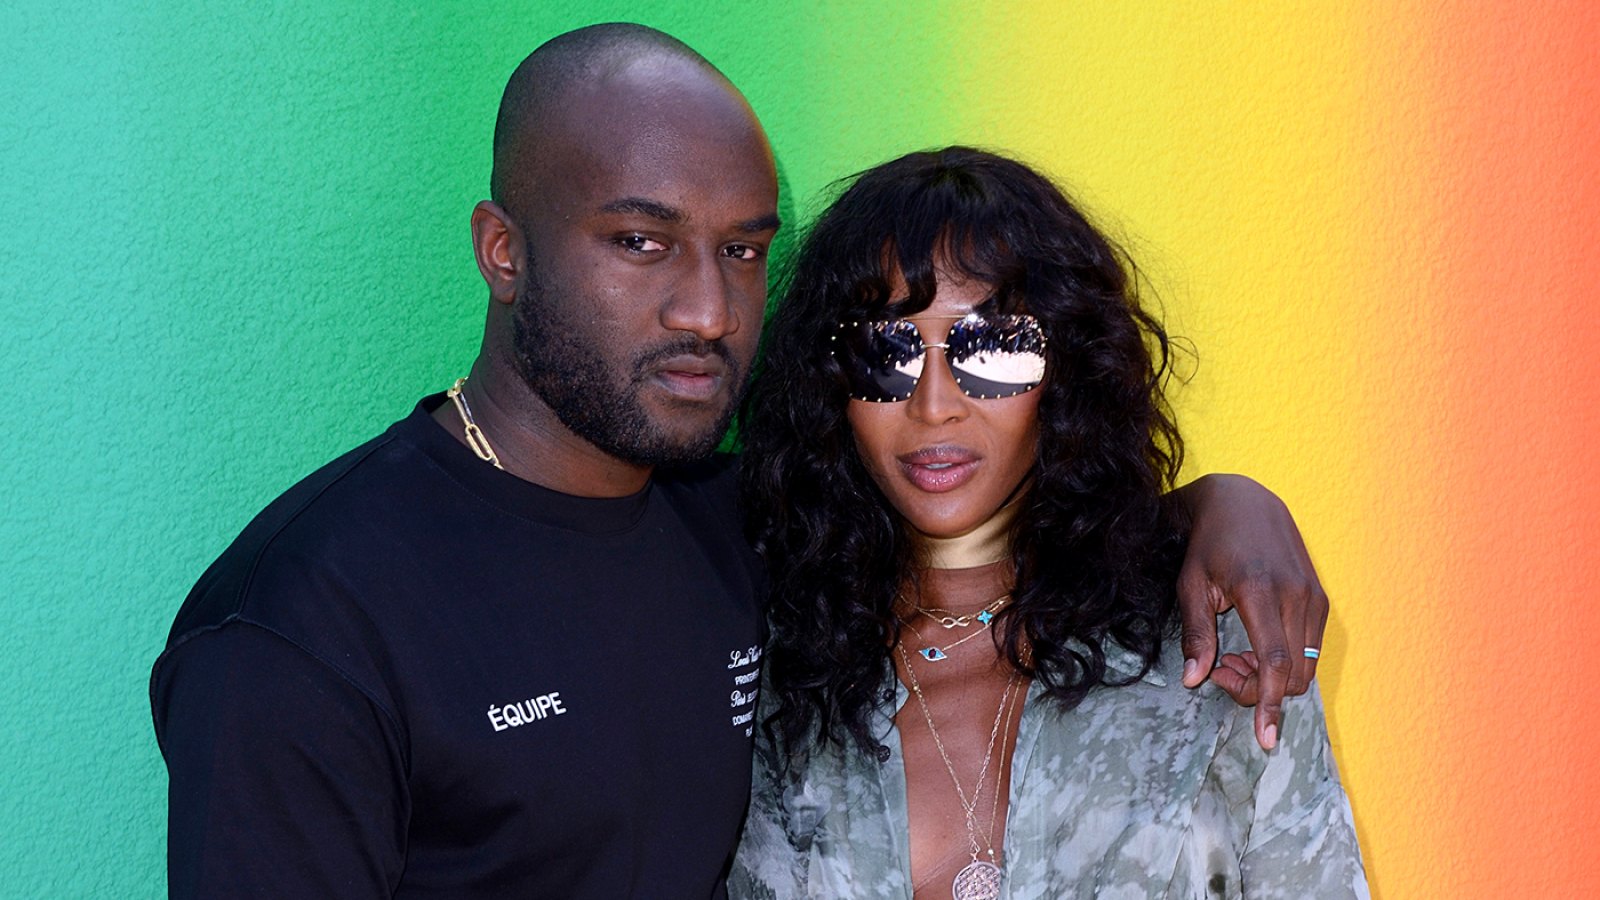 Celebrities Pay Tribute to Virgil Abloh, Iconic Fashion Designer